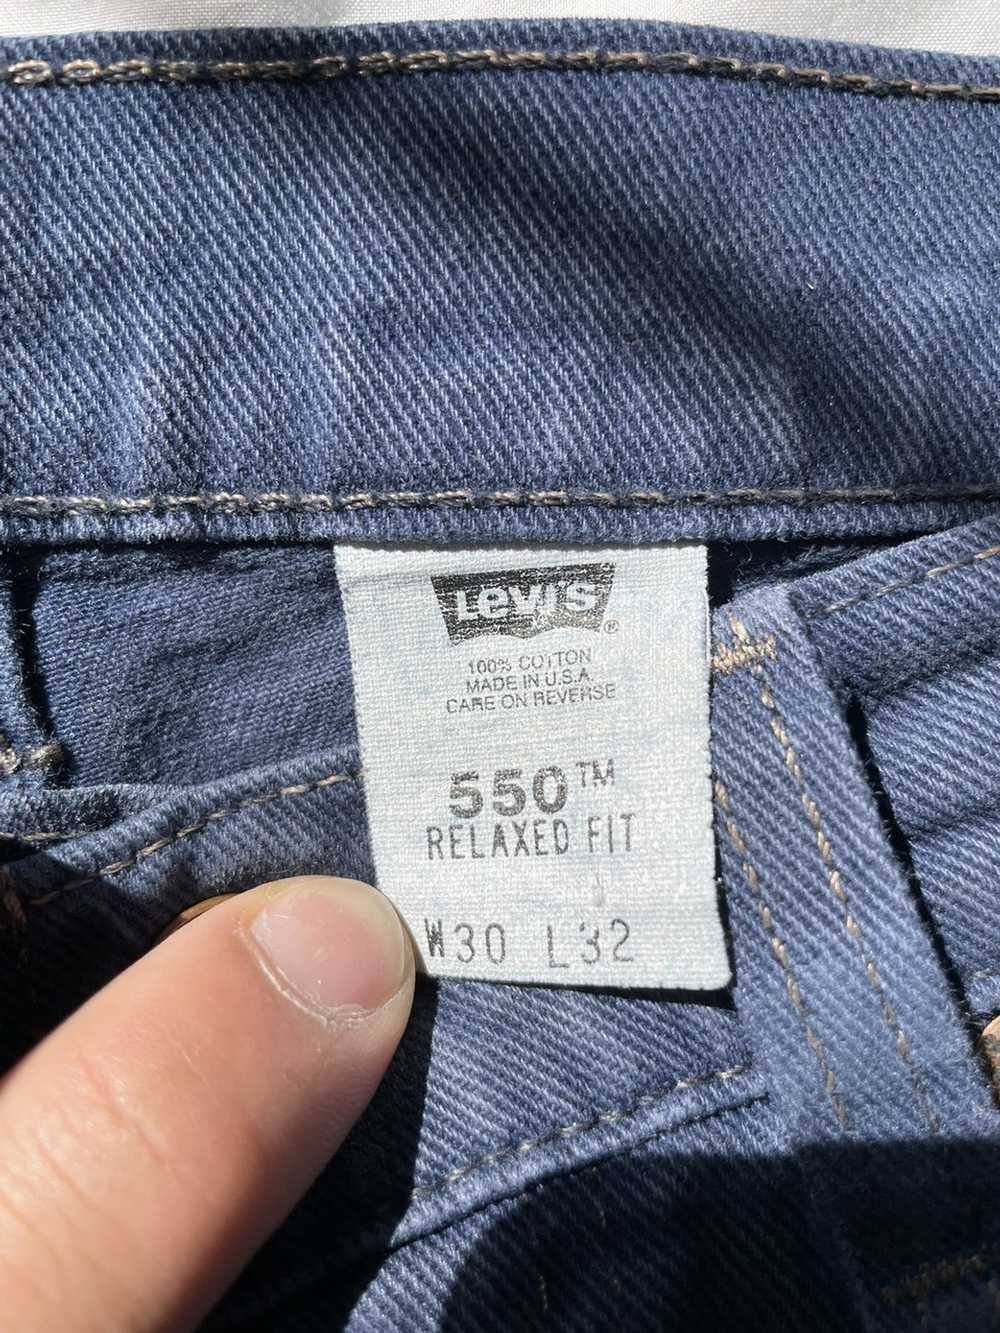 Levi's Vintage 550 relaxed fit jean - image 7